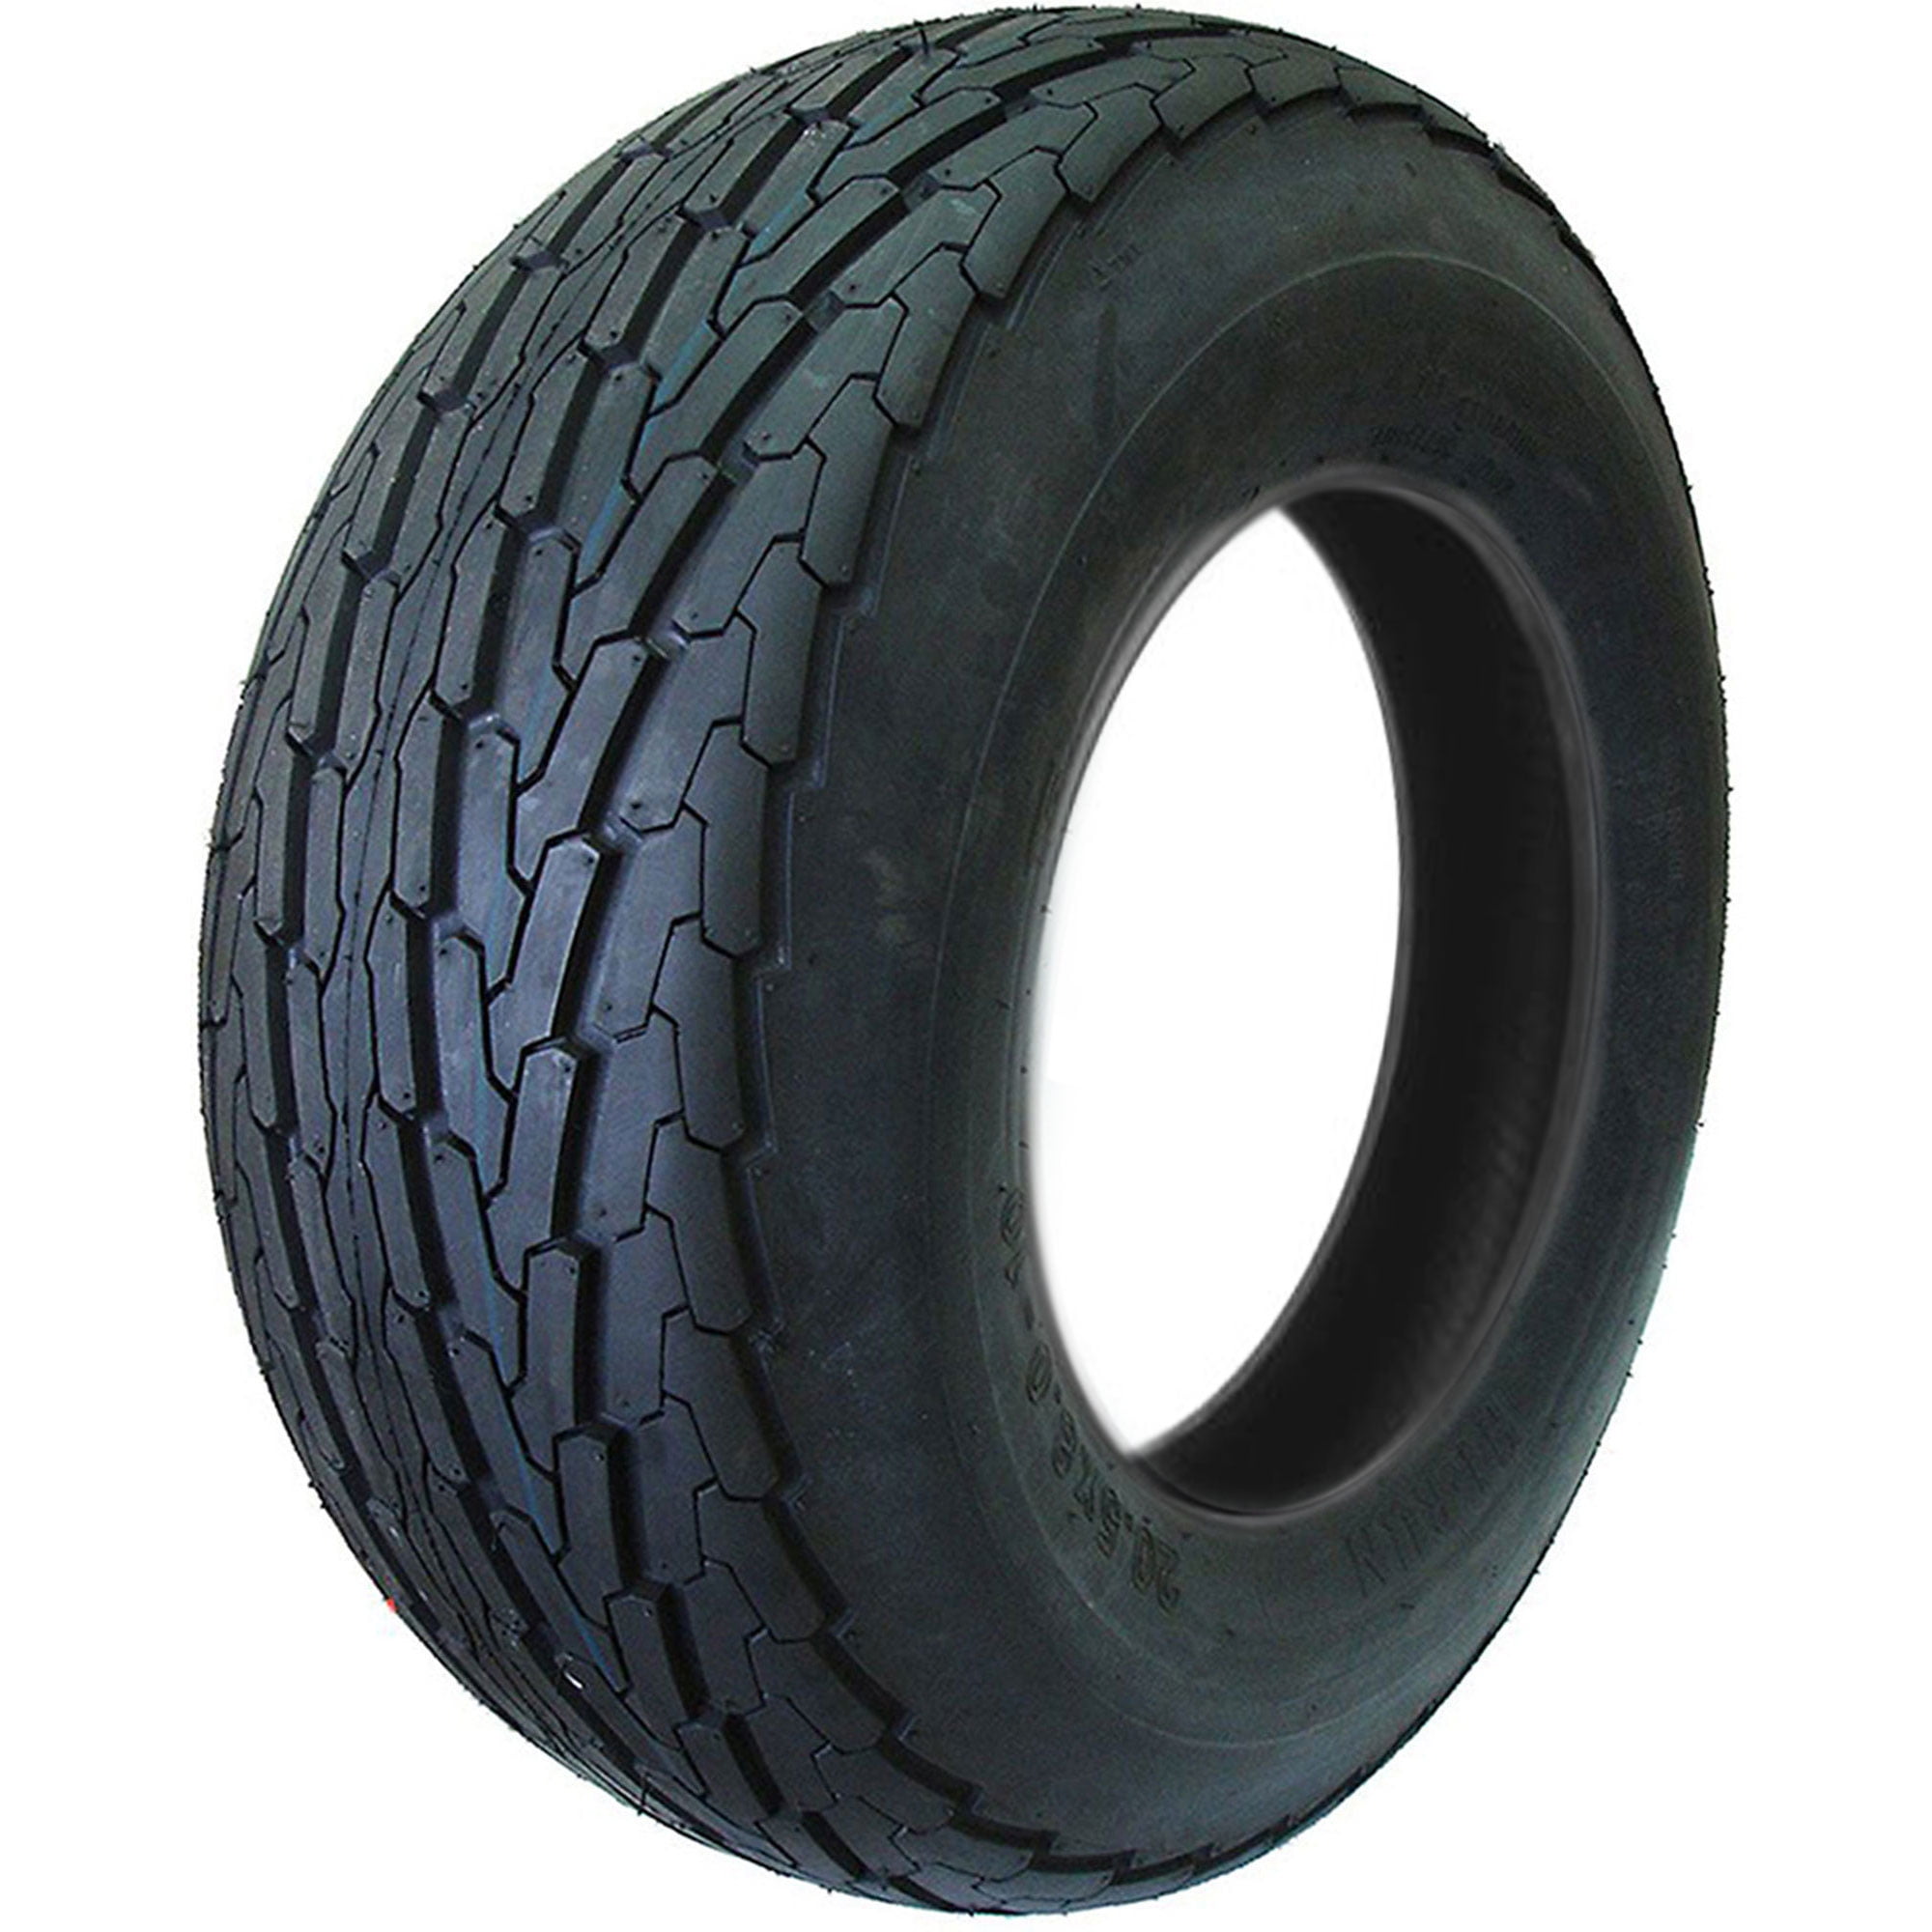 20.5X8.00-10 6PR SU03 SUPERCARGO HEAVY DUTY TRAILER TIRE ONLY, ONE TIRE ONLY NEW 